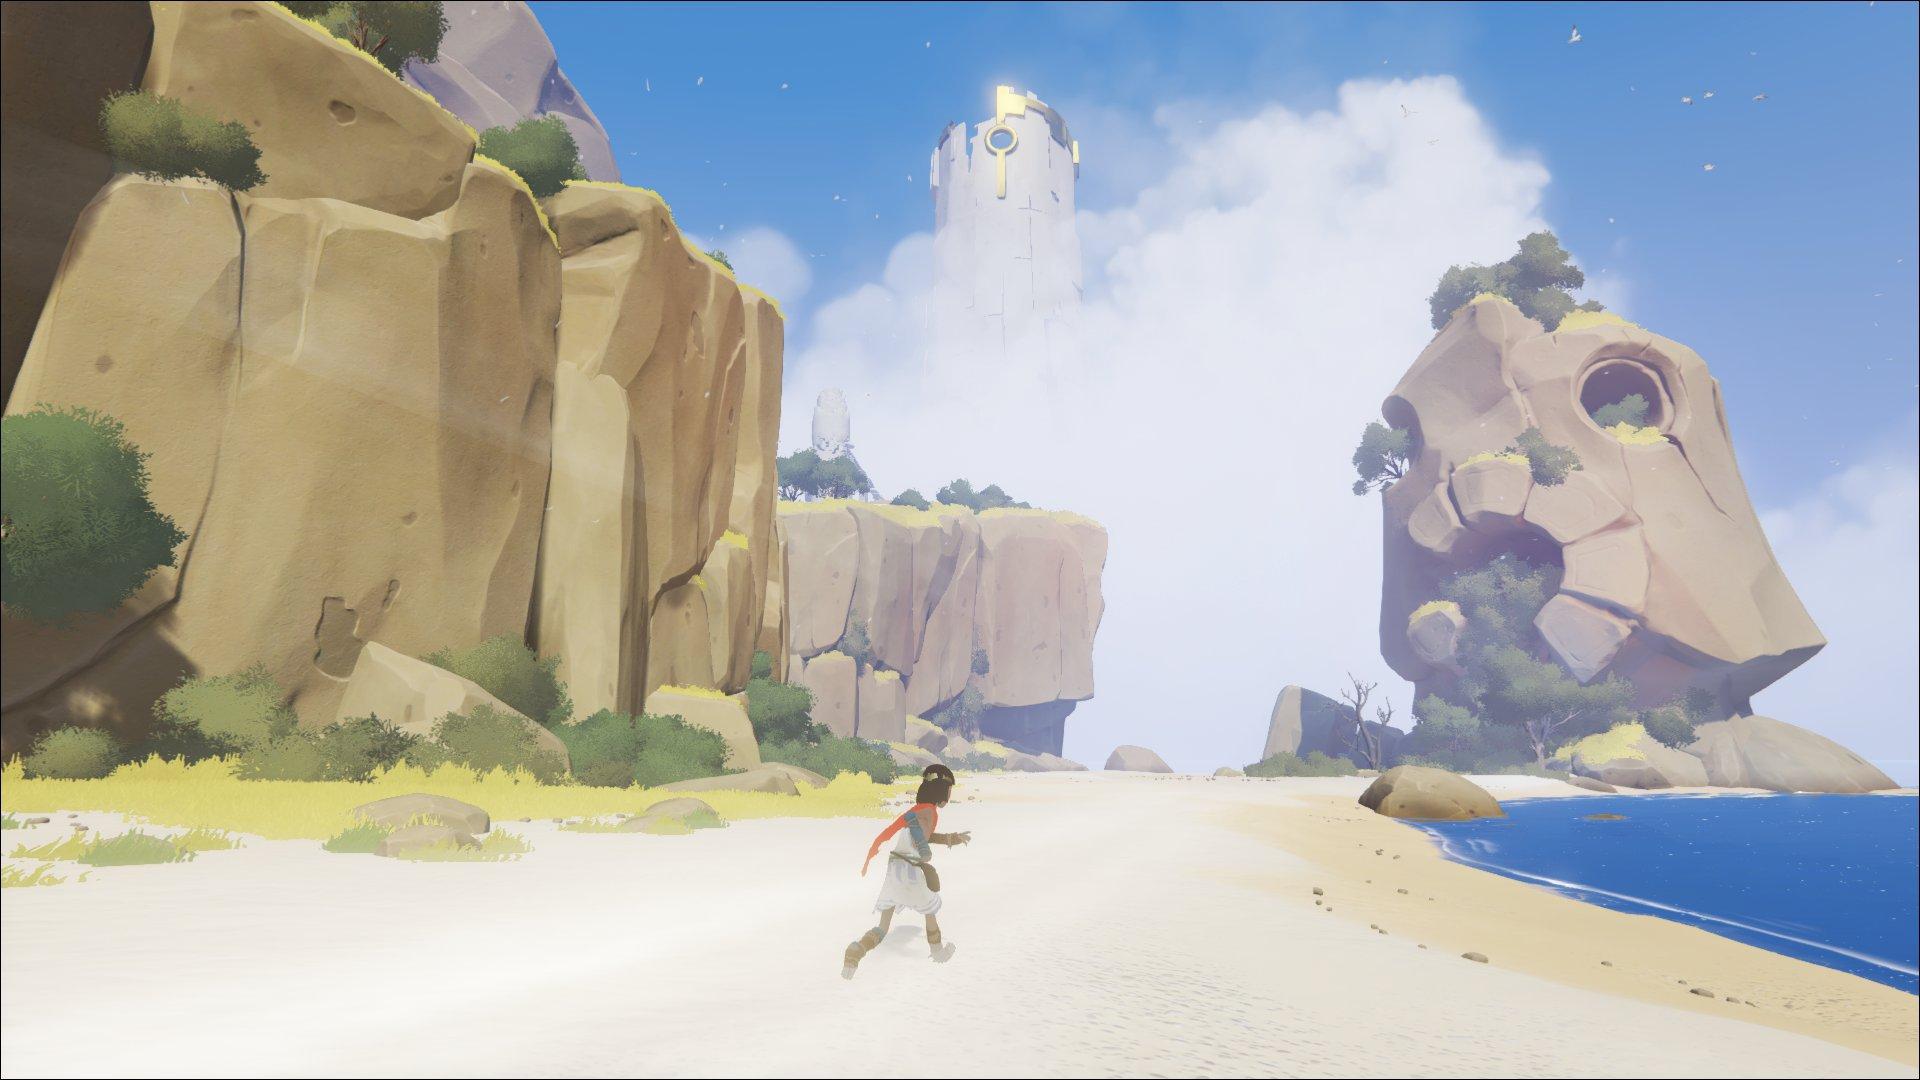 The game world Rime wallpaper and image, picture, photo